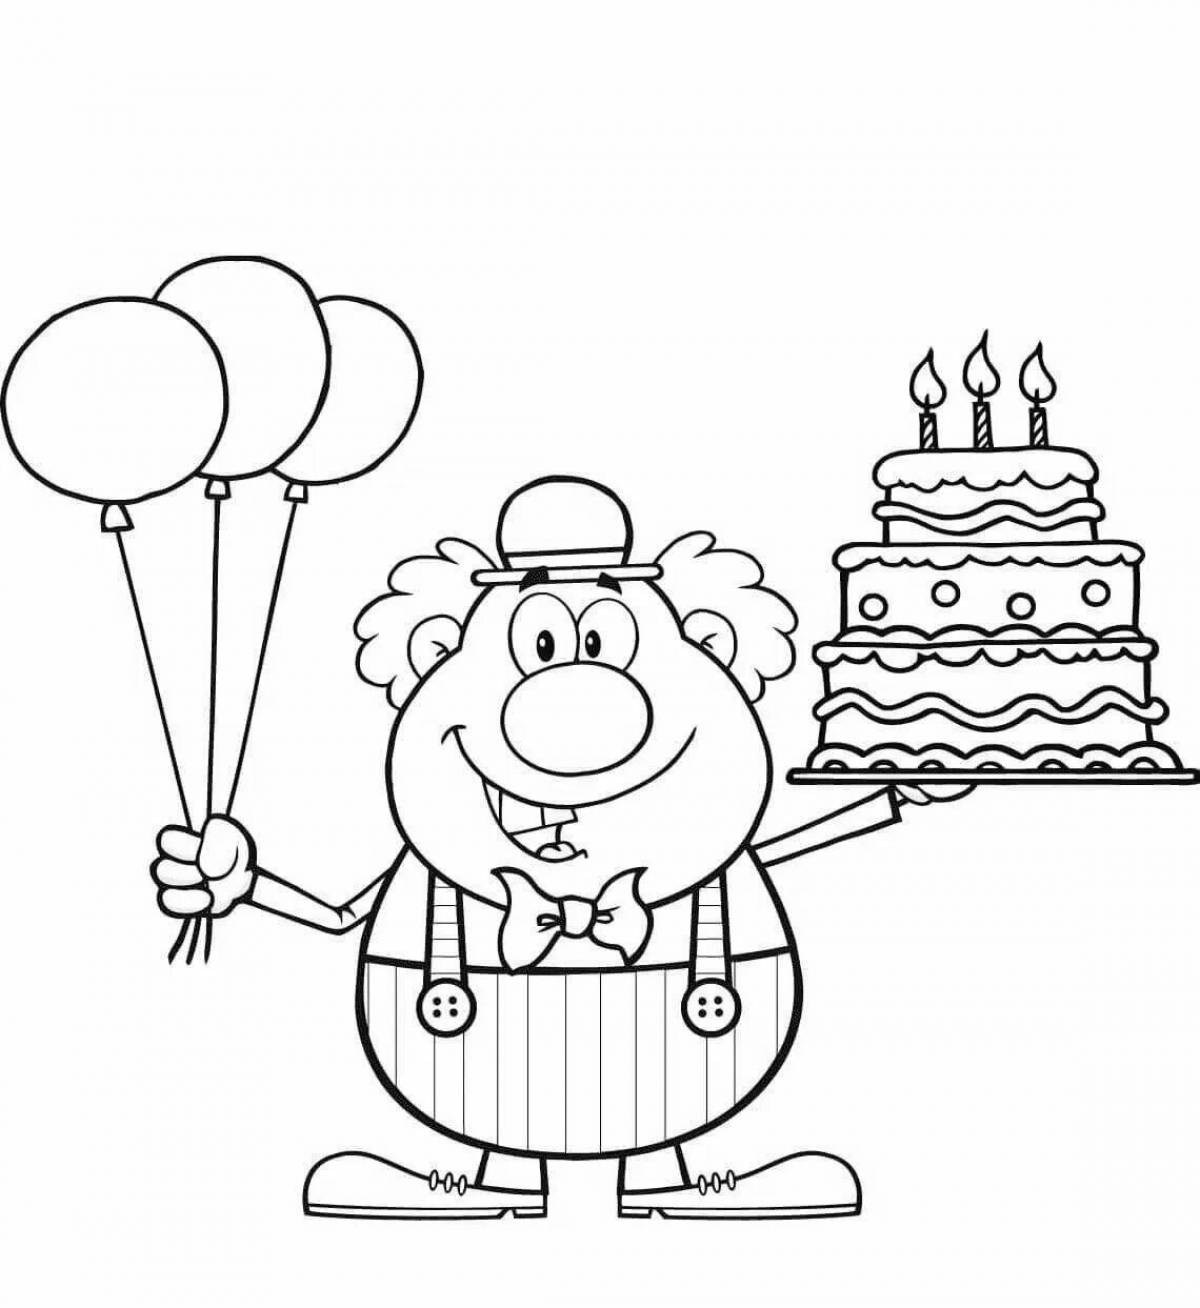 Grandpa's birthday coloring page from granddaughter